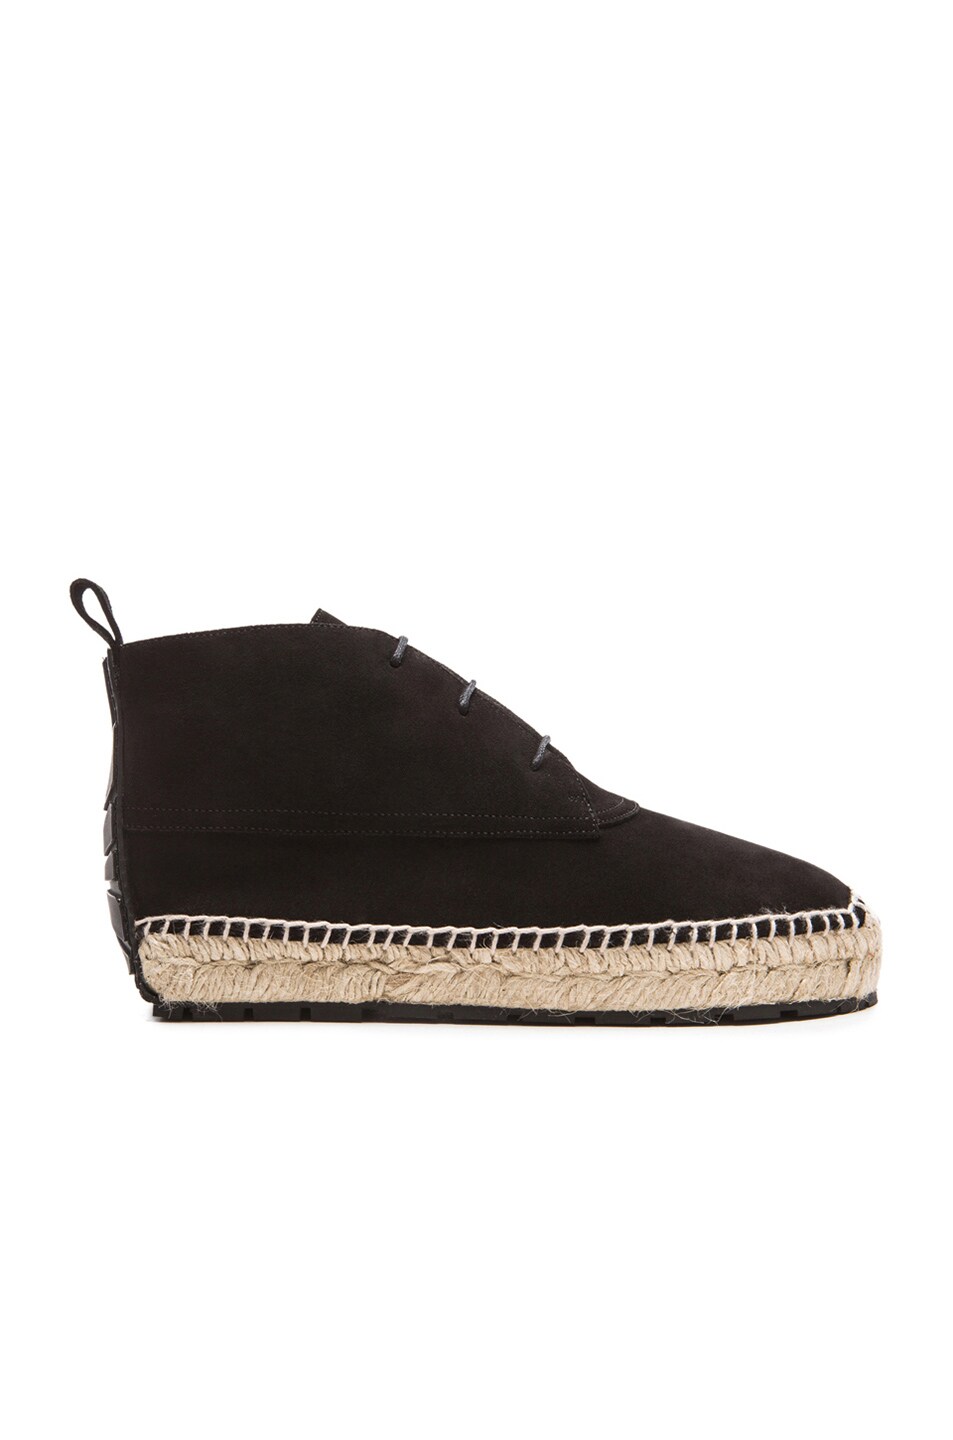 Image 1 of Balenciaga Espadrille Suede Ankle Boots in Black